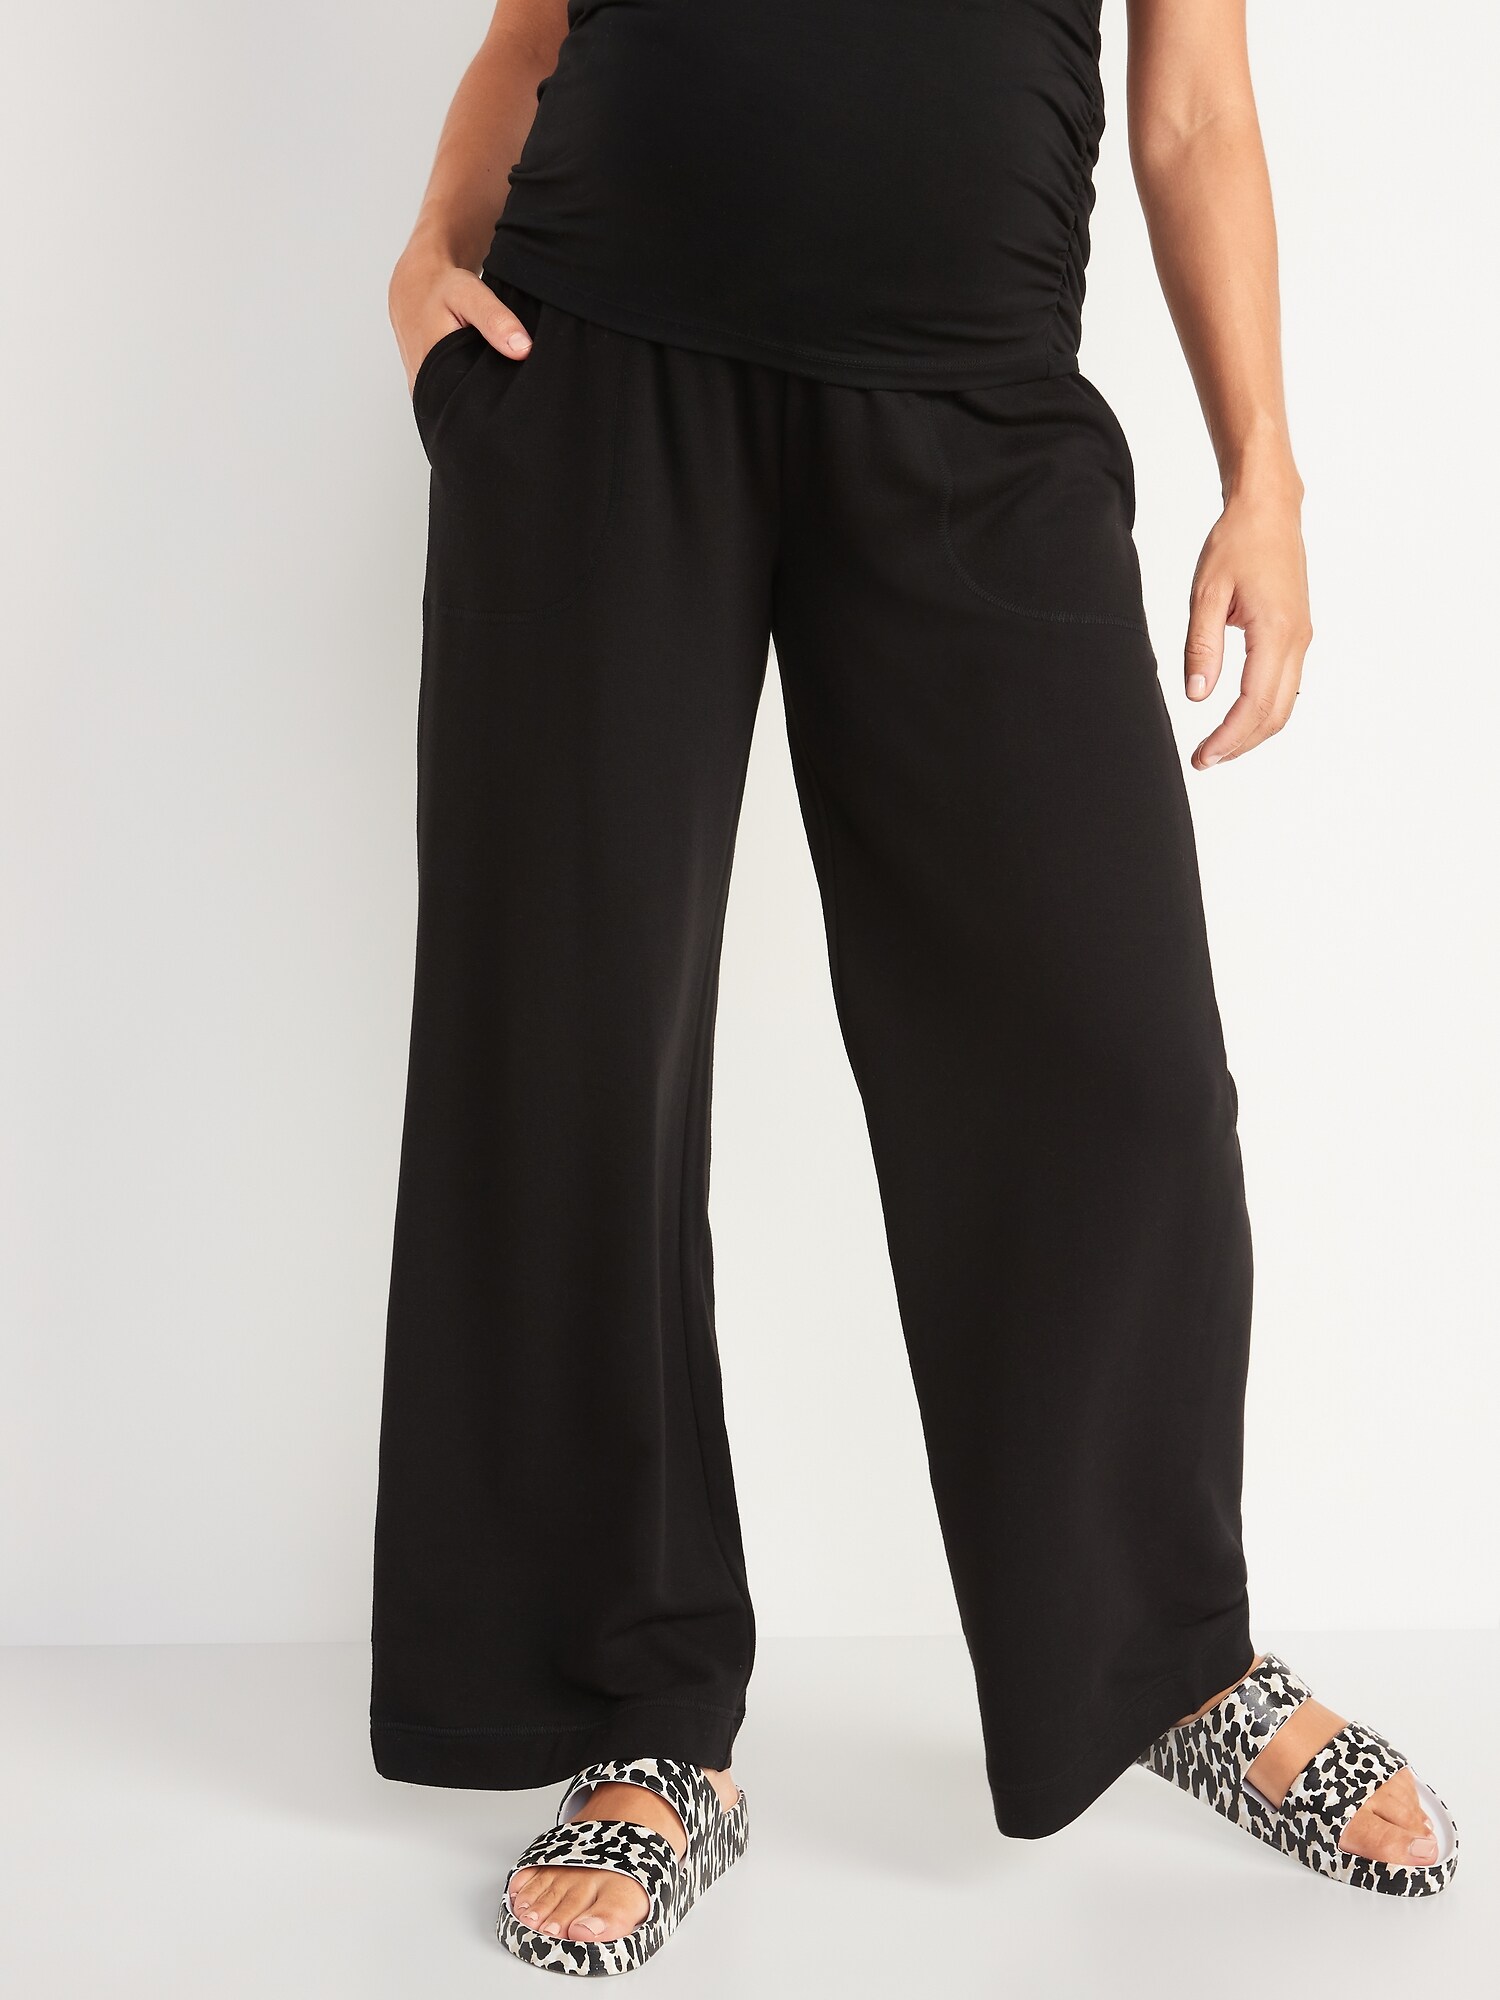 Knitted Maternity Sweatpants